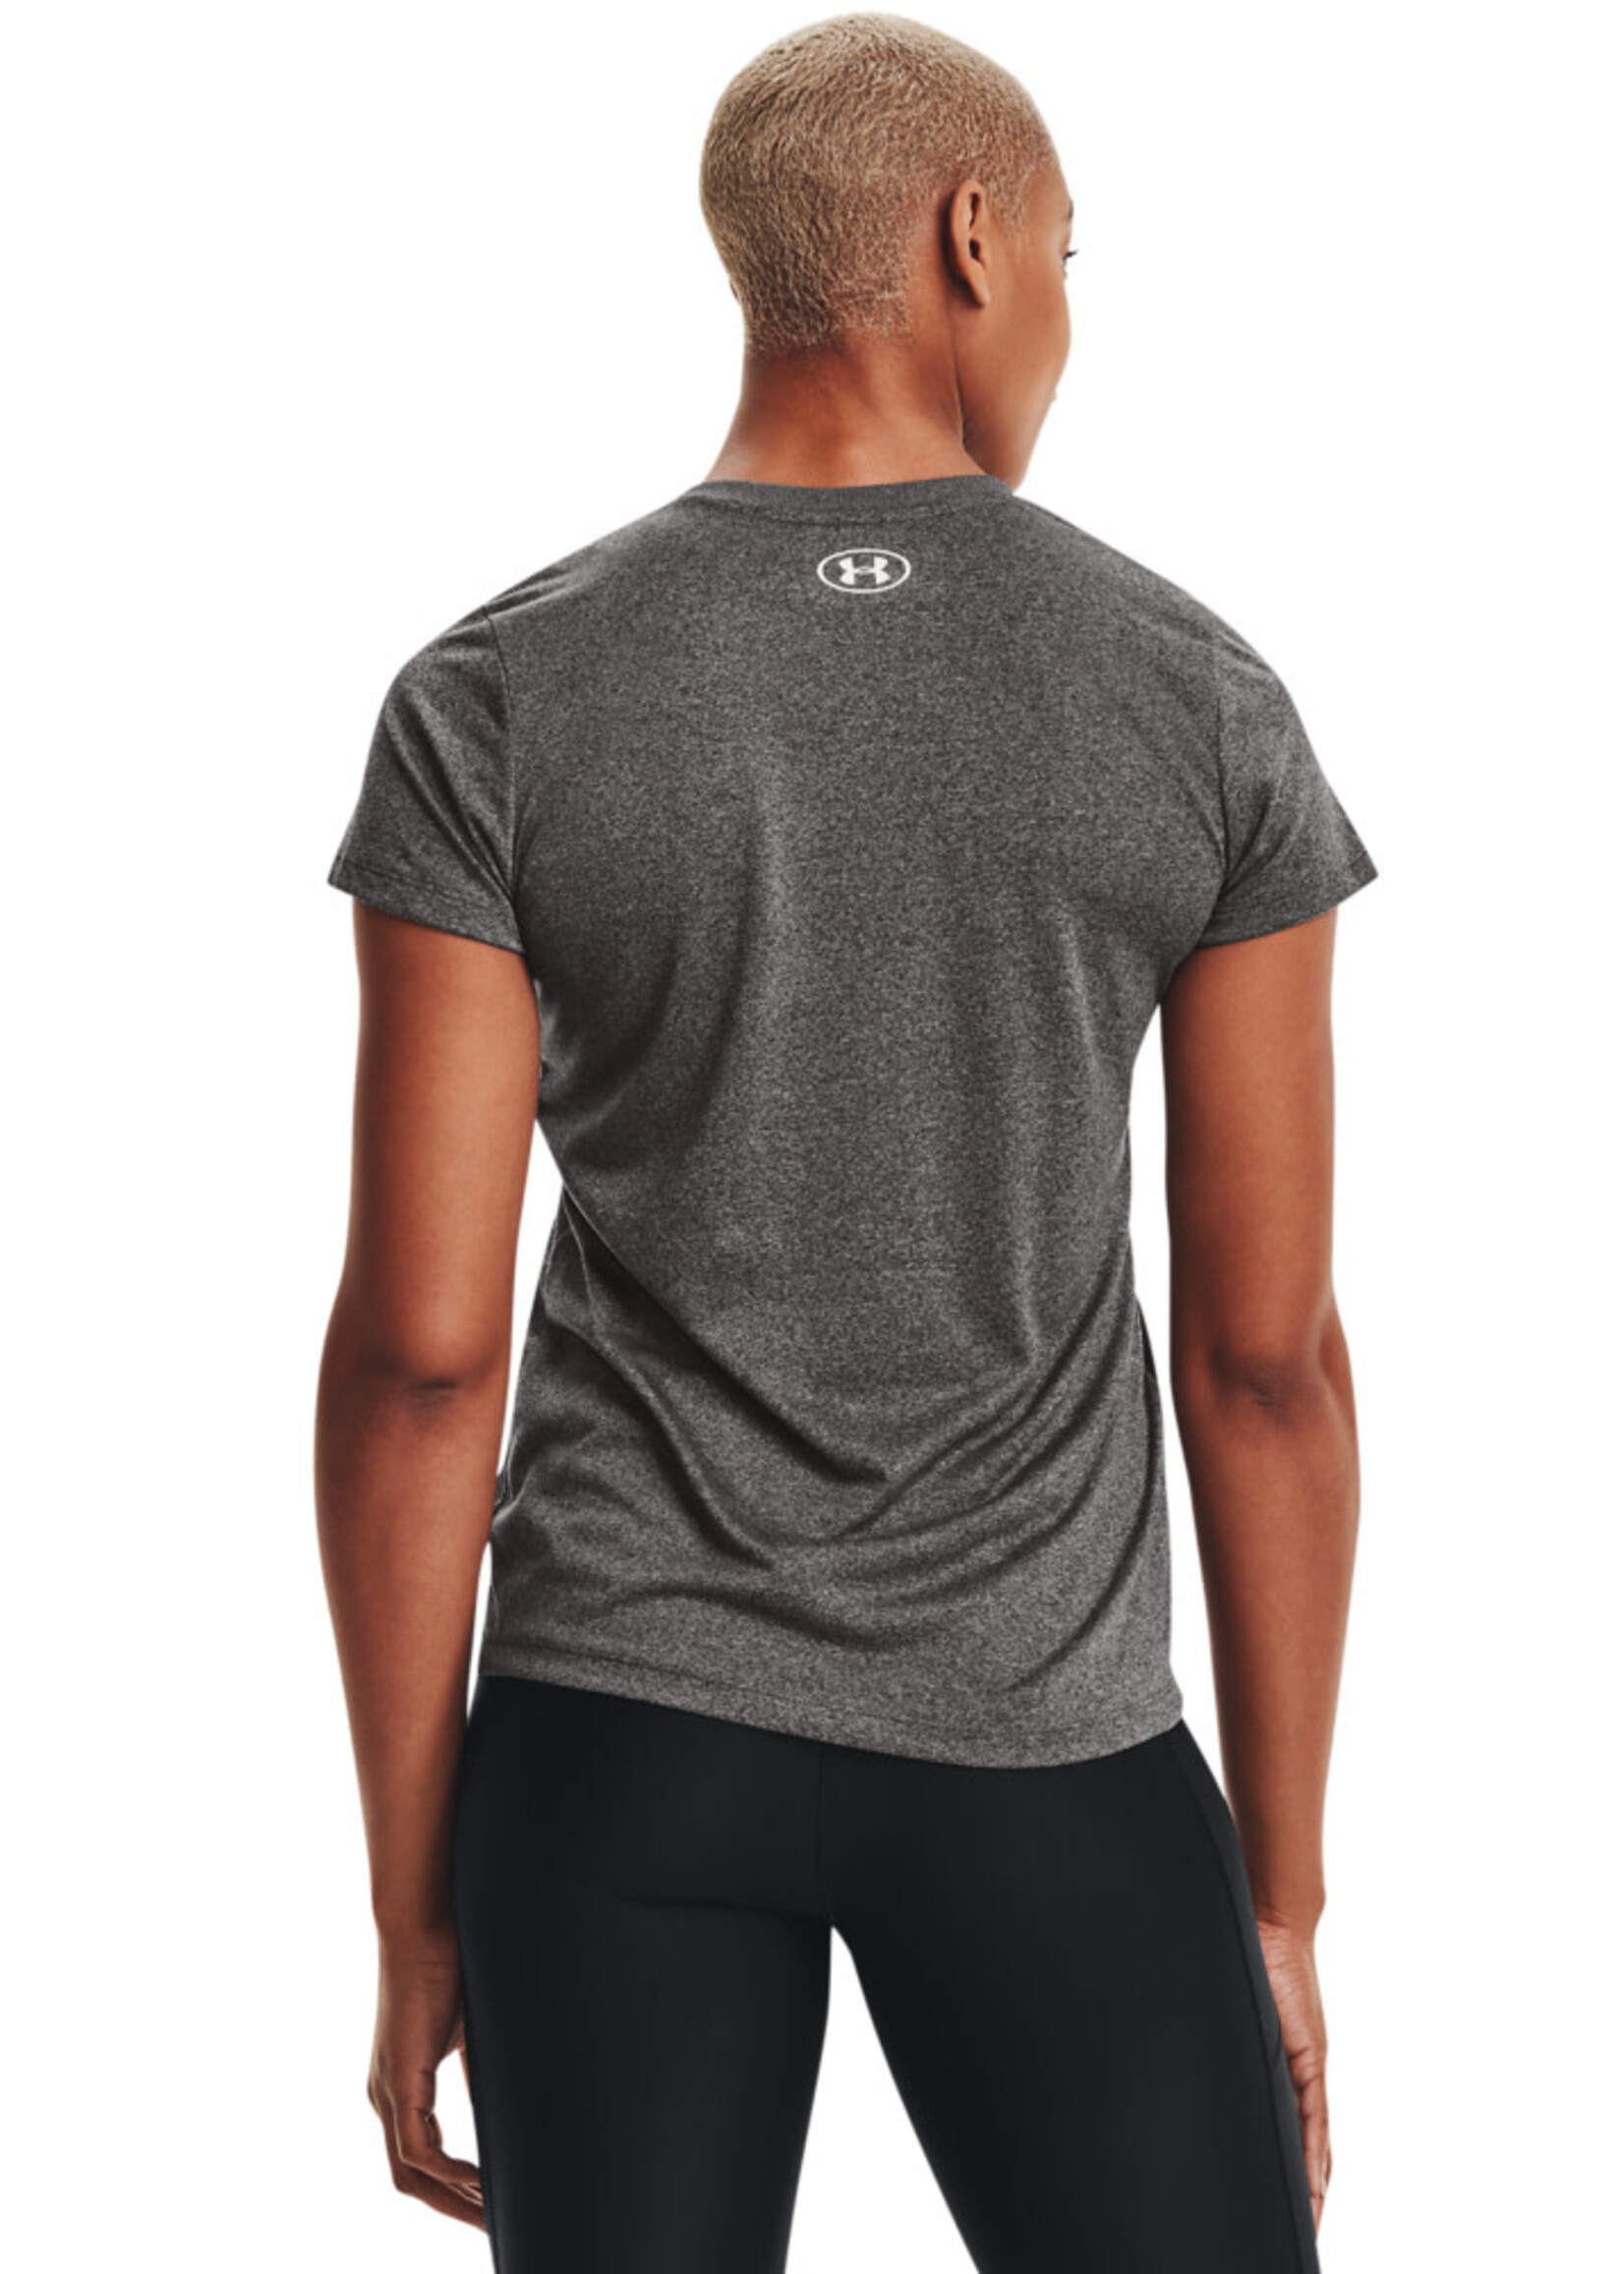 Under Armour Tech SSV - Solid-GRY